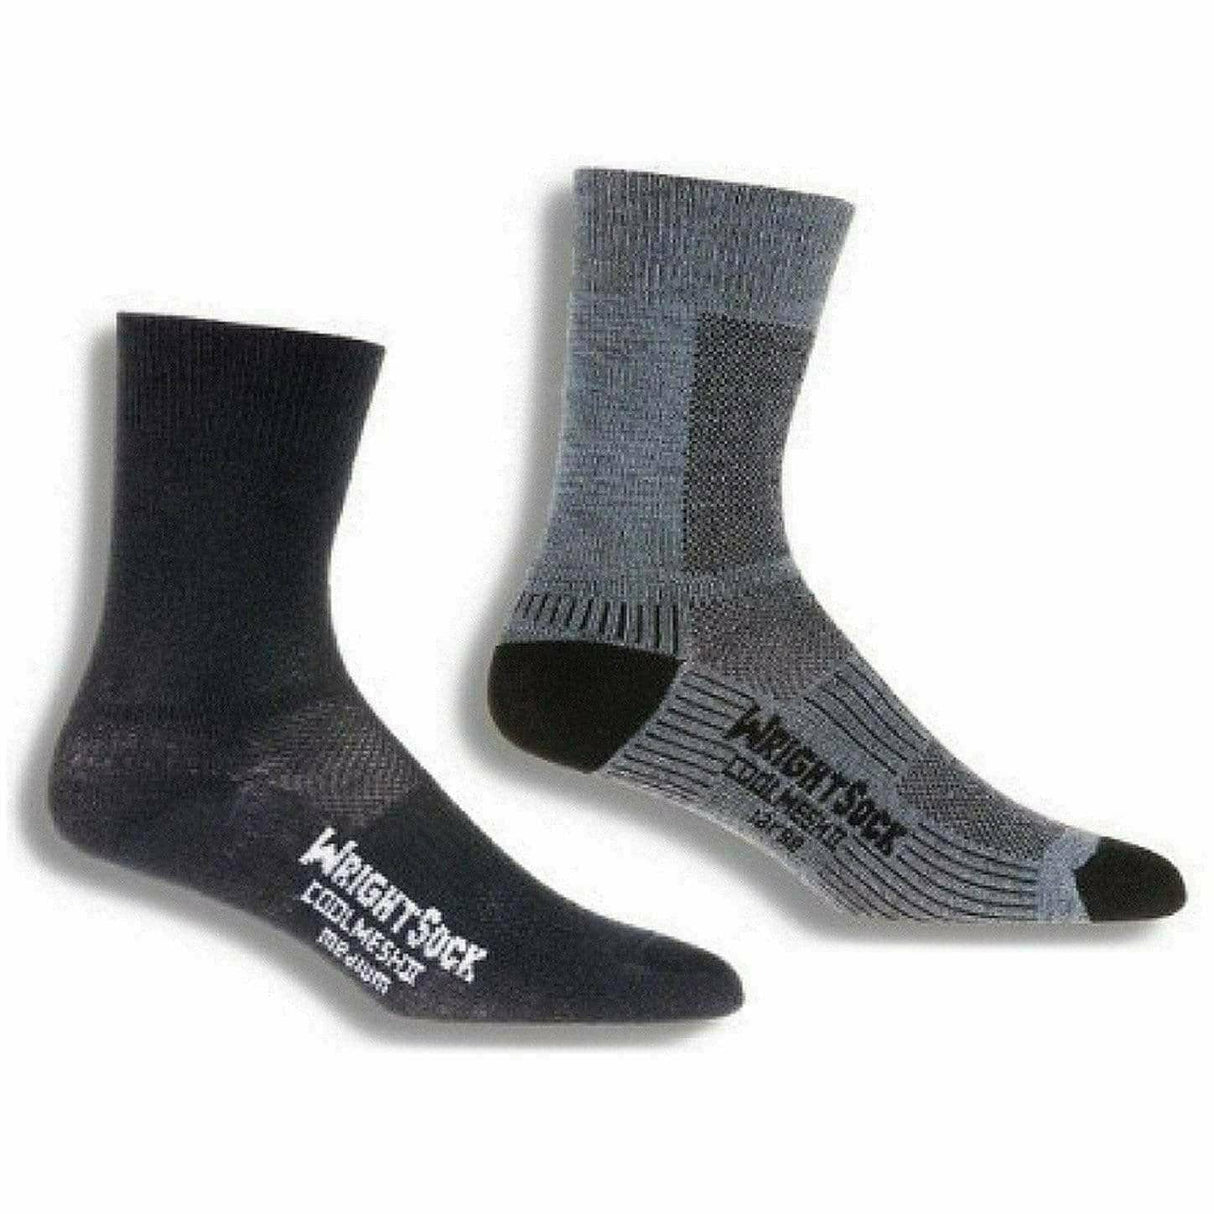 Wrightsock Double-Layer Coolmesh II Lightweight Crew Socks - Clearance  -  Small / Black/Grey / 2-Pair Pack